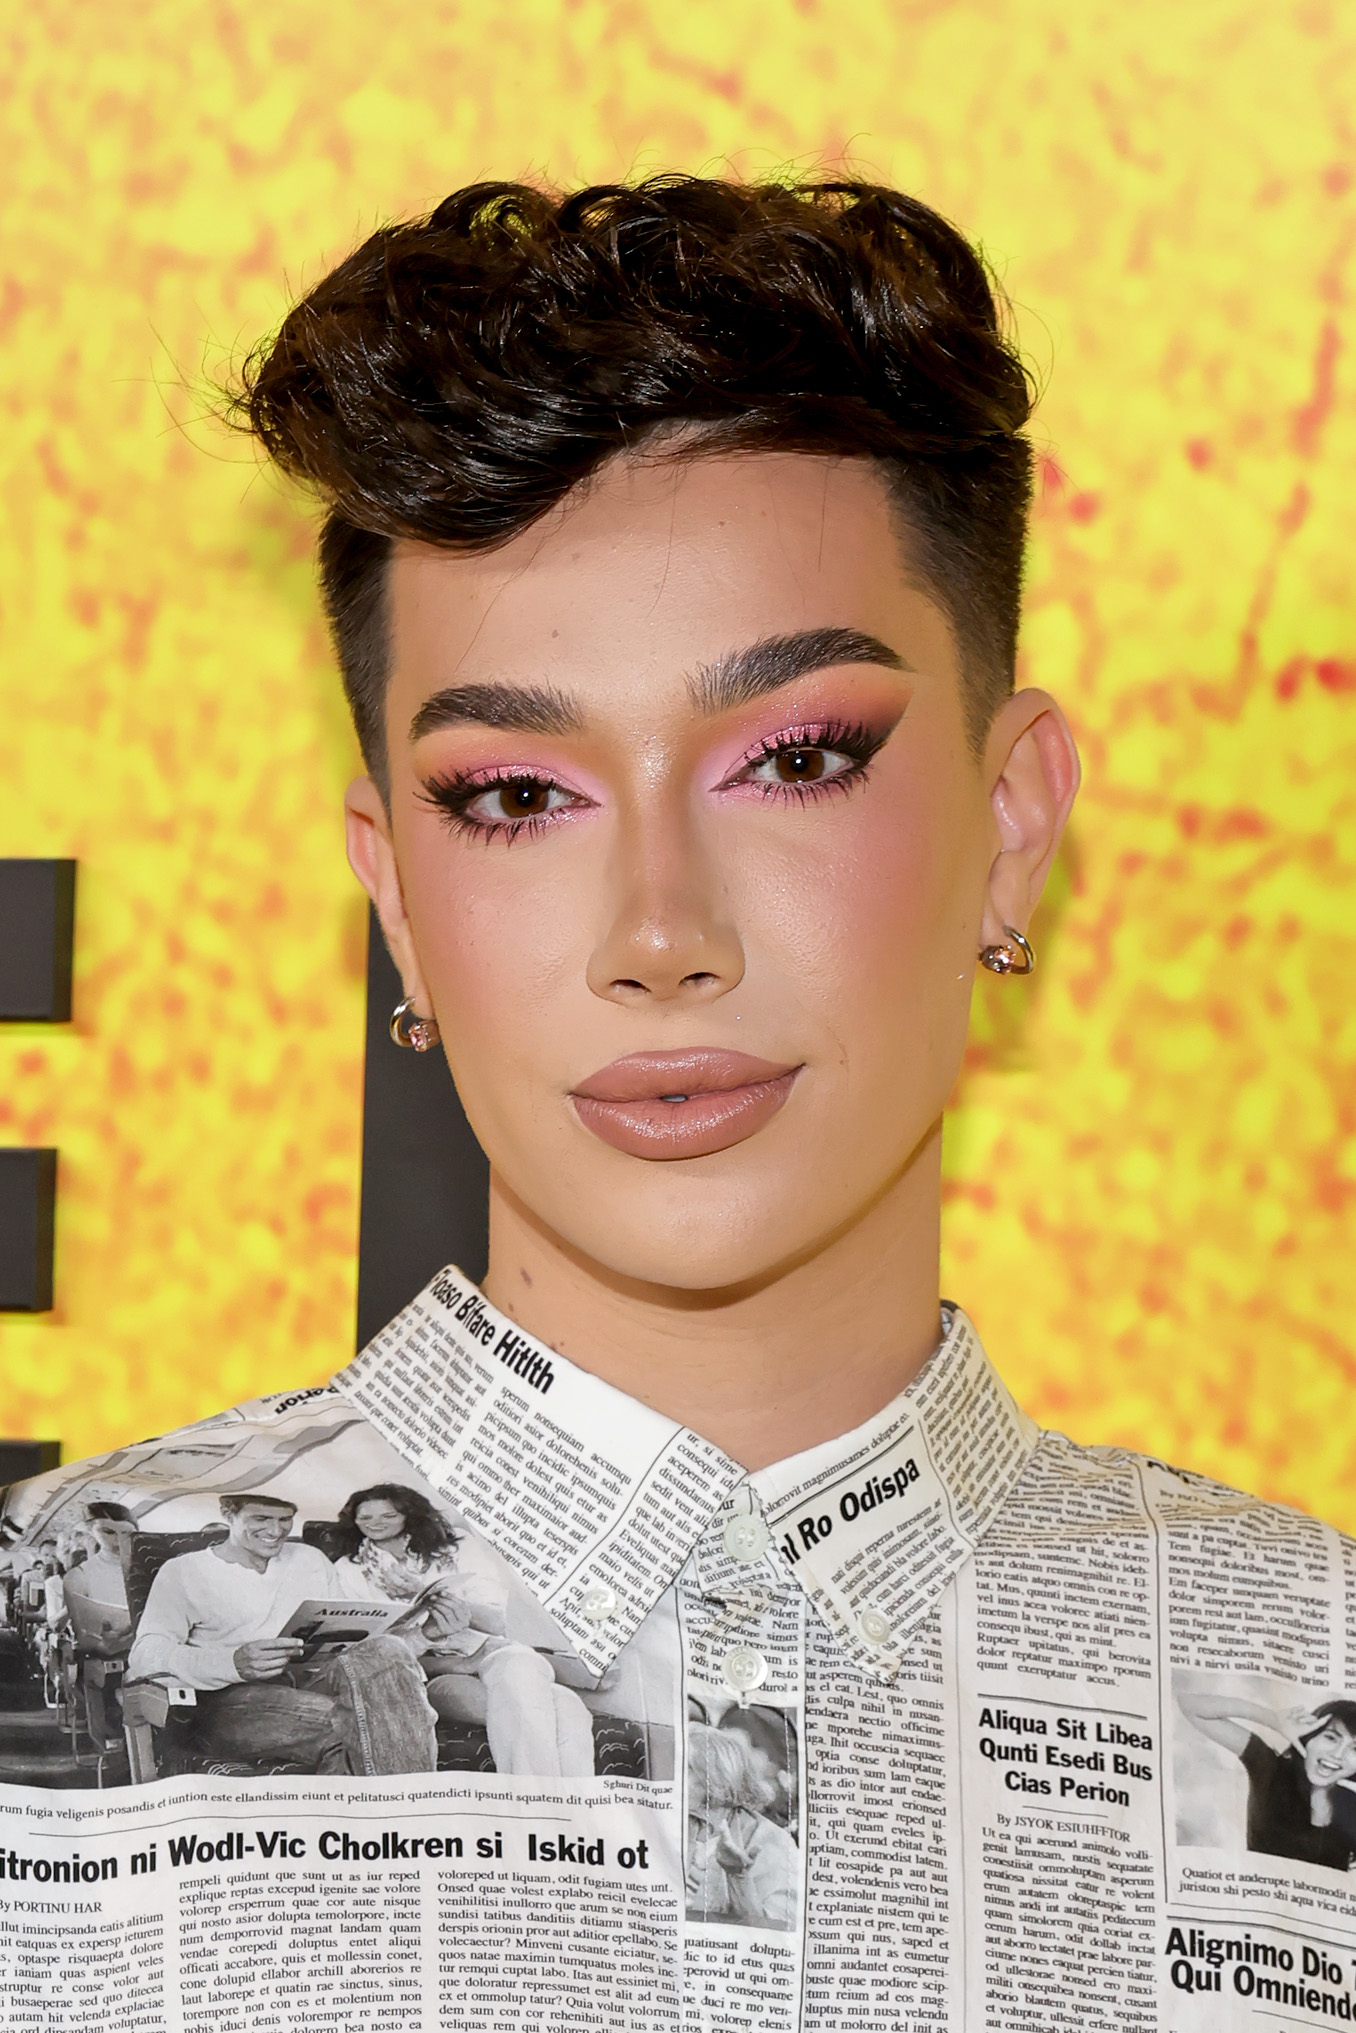 James Charles Thought About Suicide After Grooming Allegations